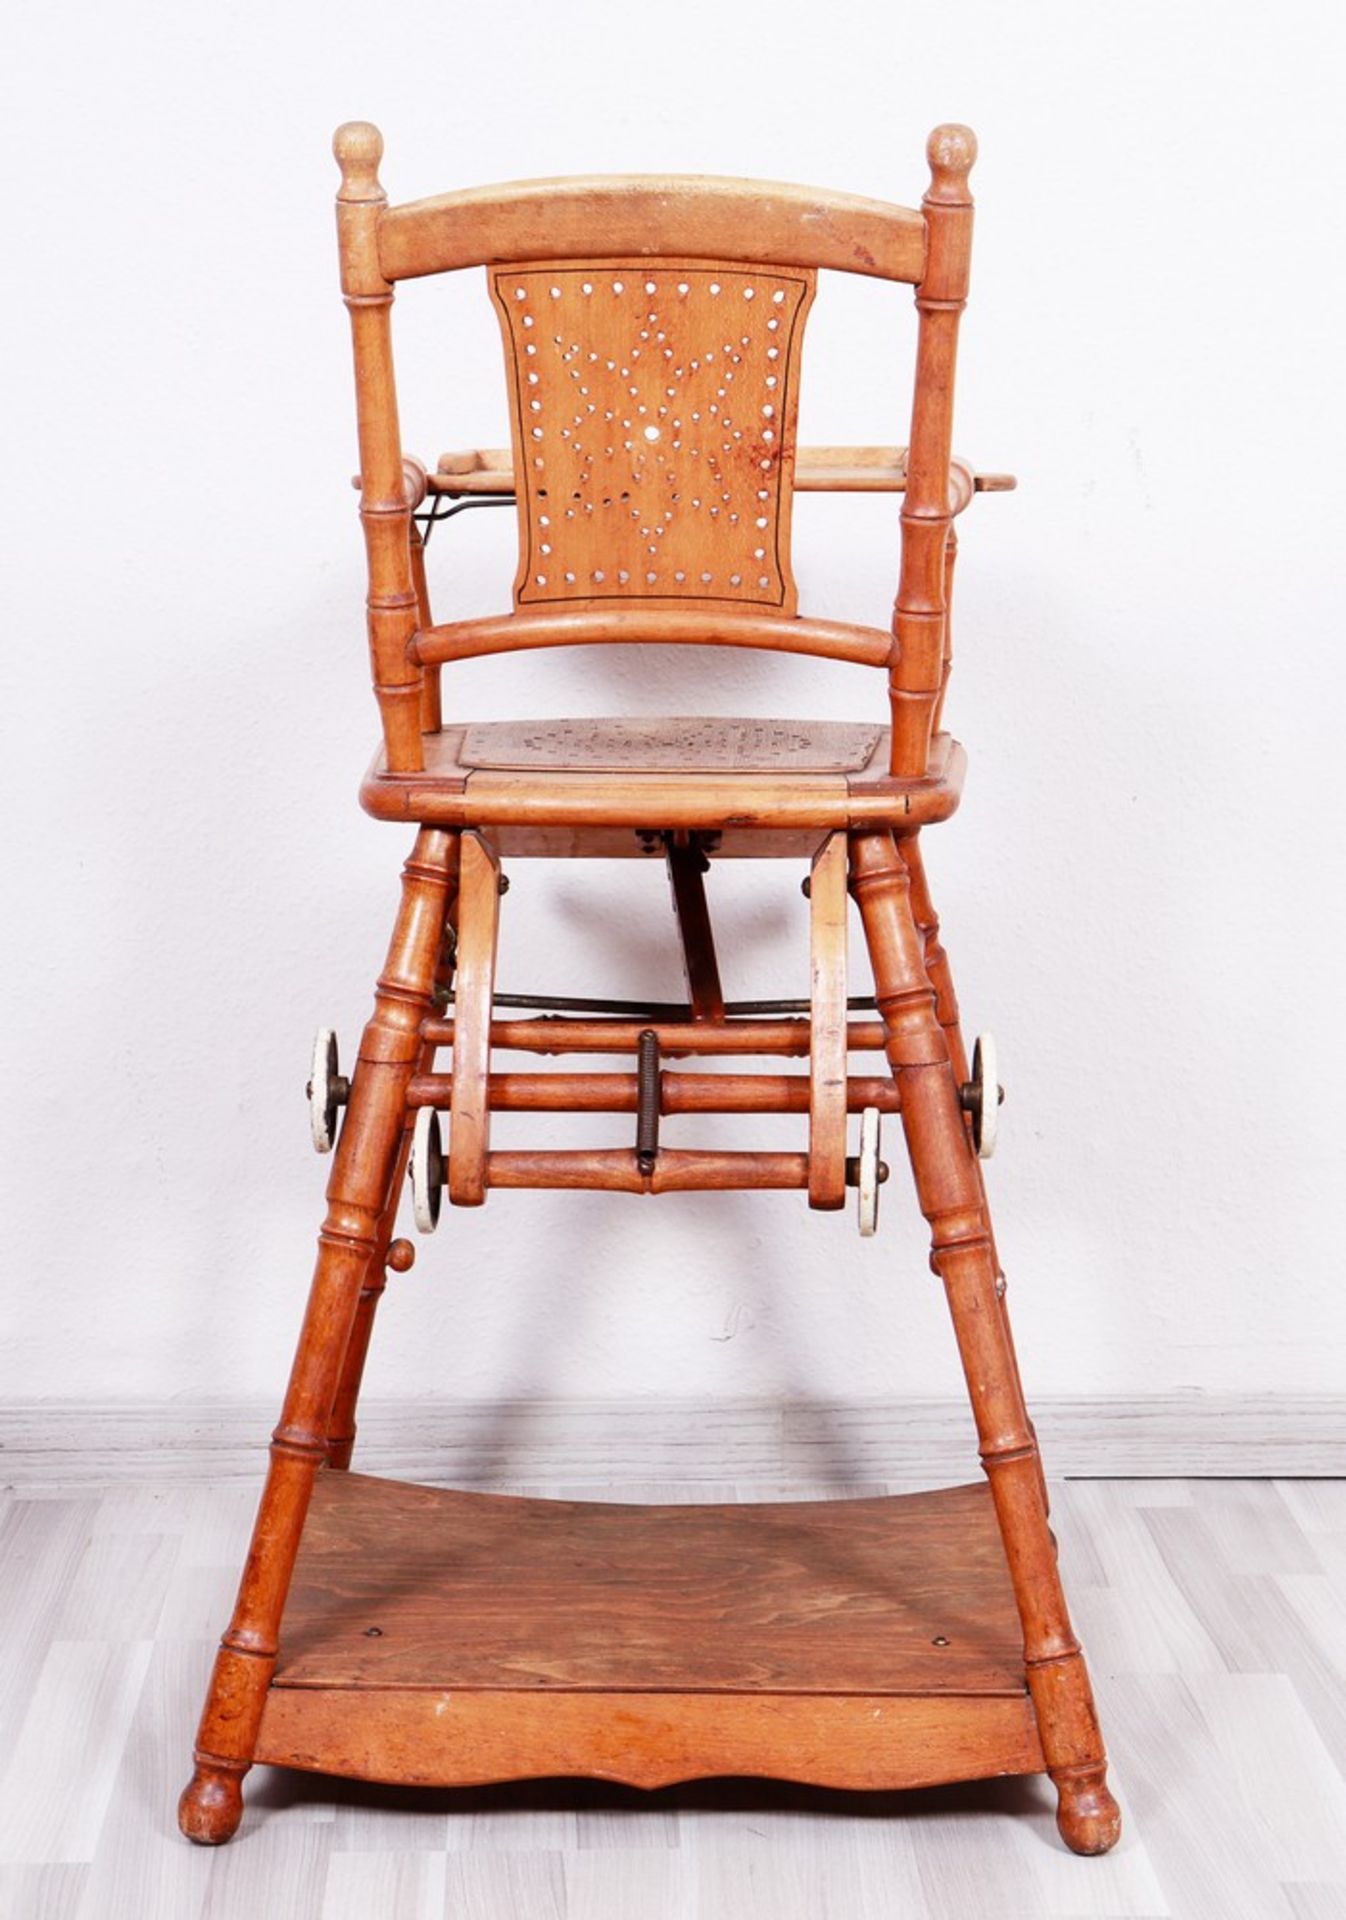 Convertible children's chair/high chair, German, c. 1920/30 - Image 4 of 4